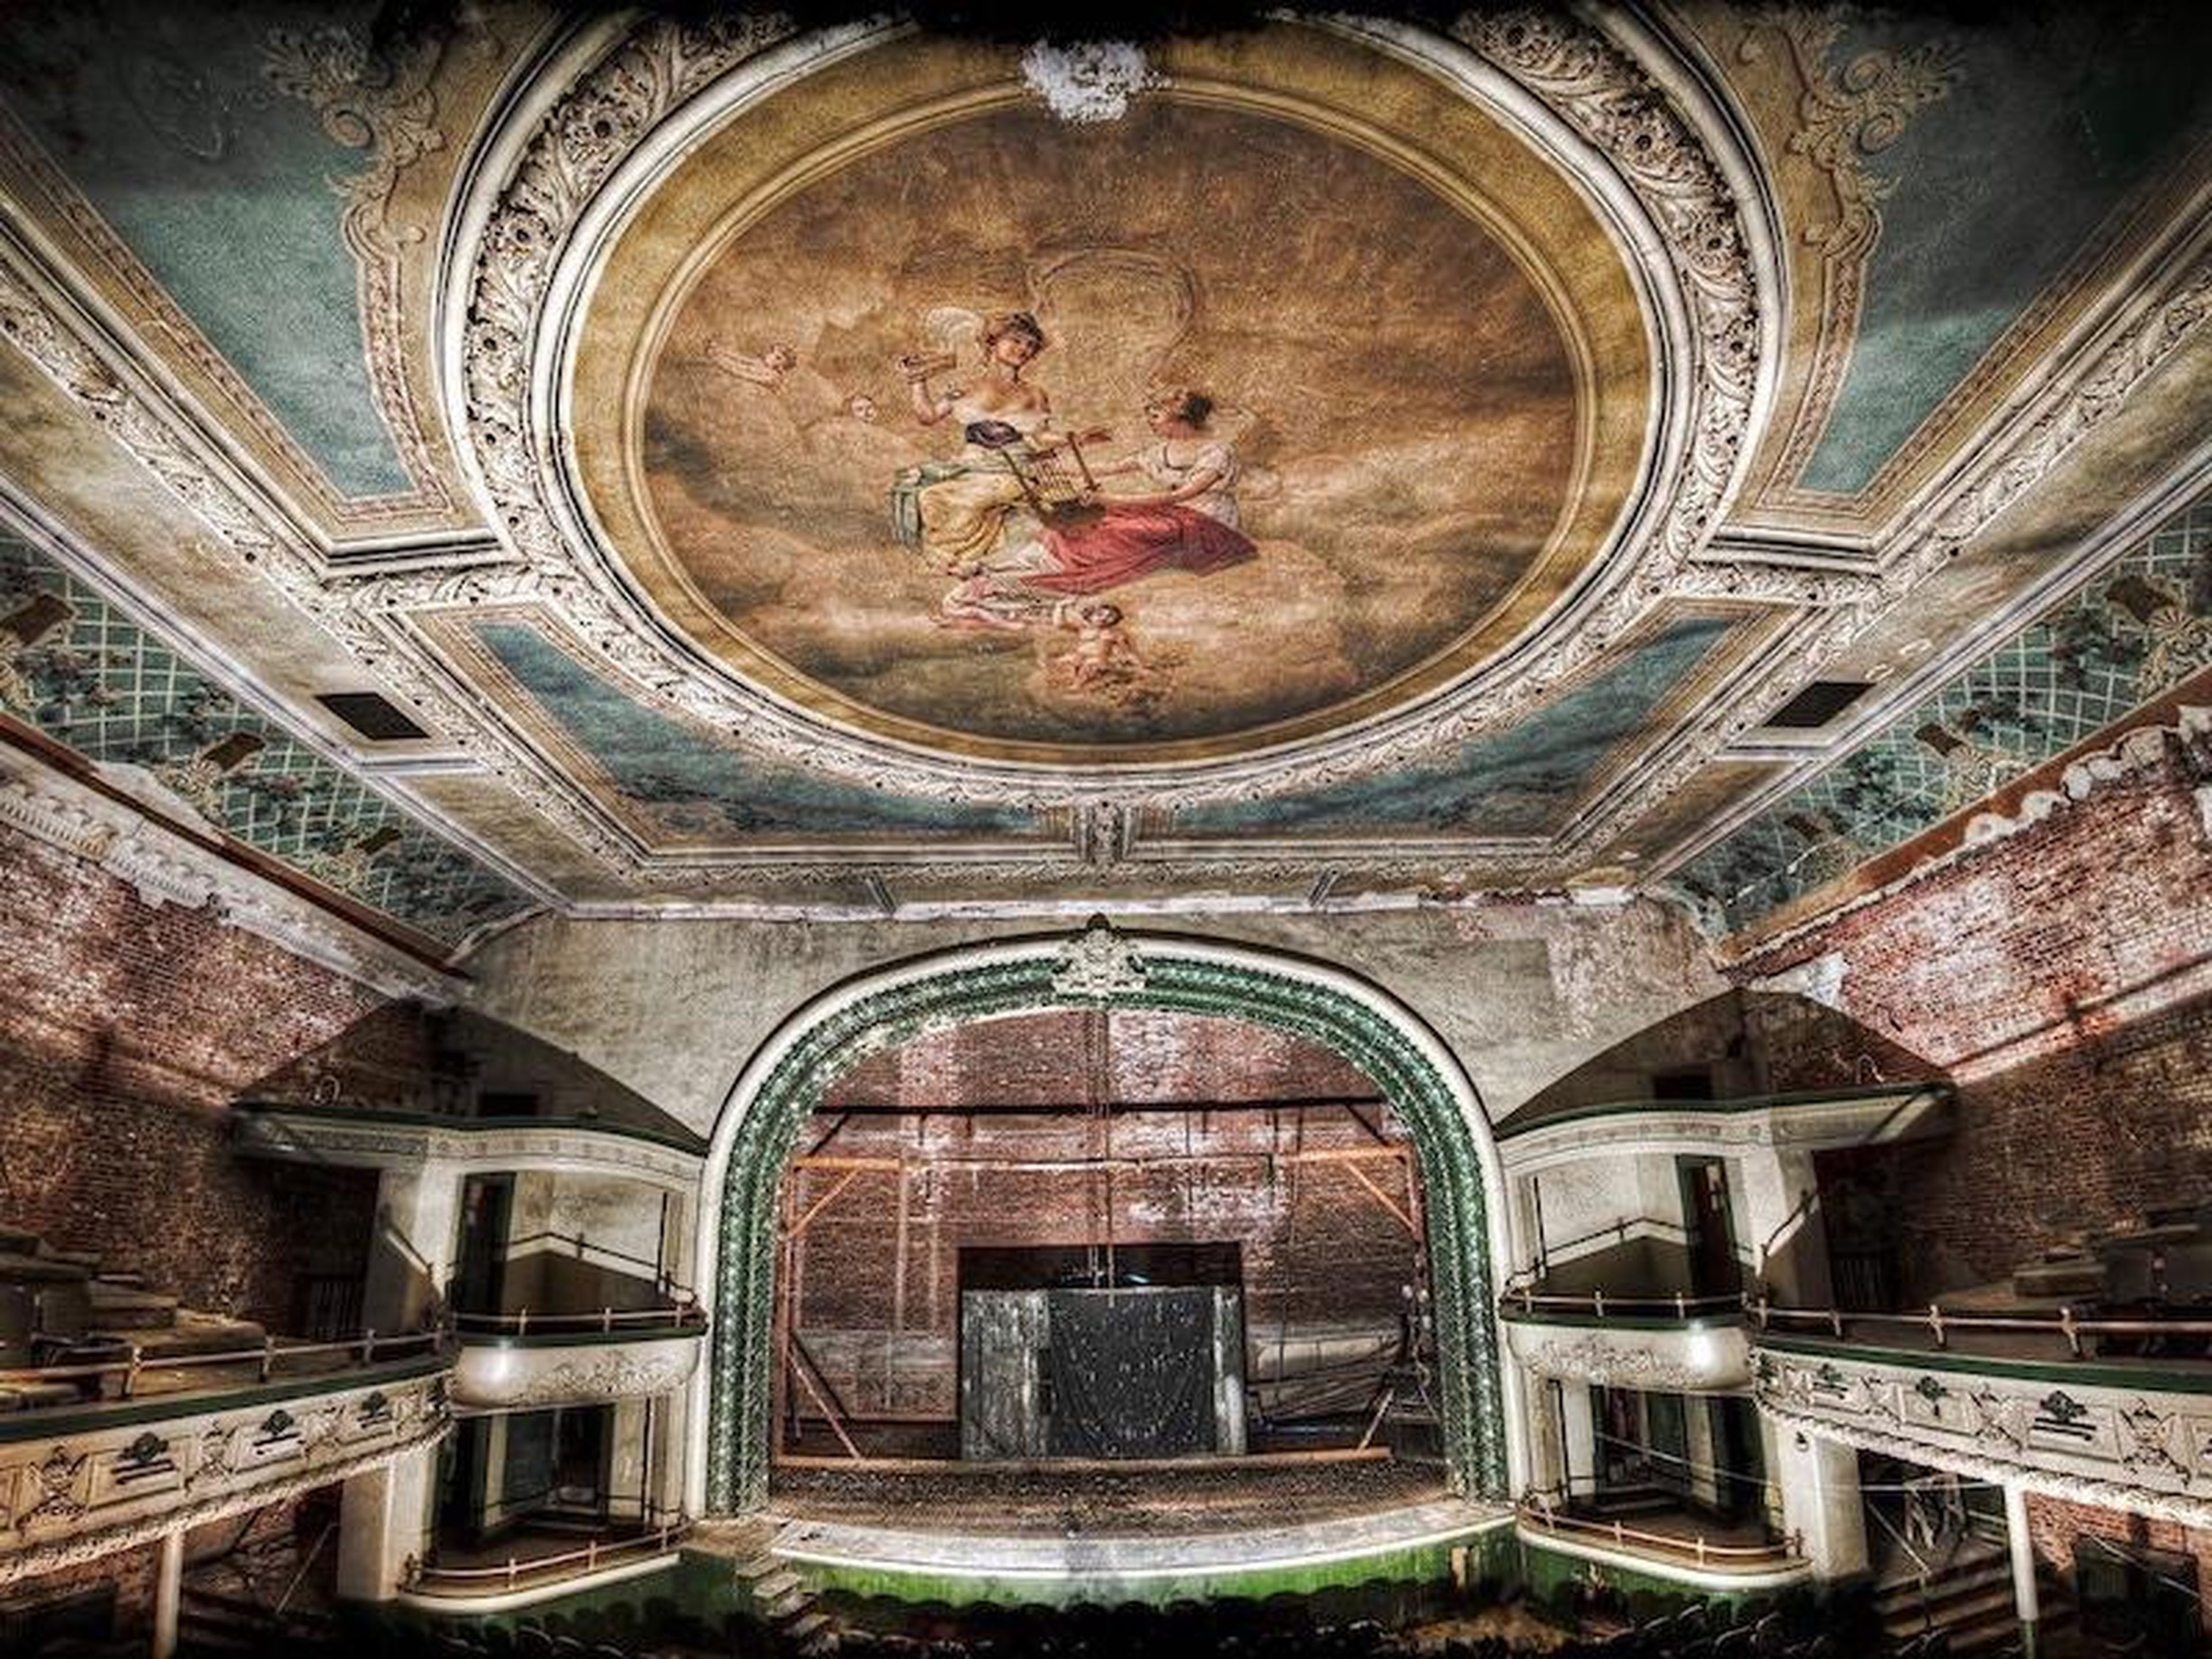 This theater was once lavishly decorated, but it has been abandoned since 1962.